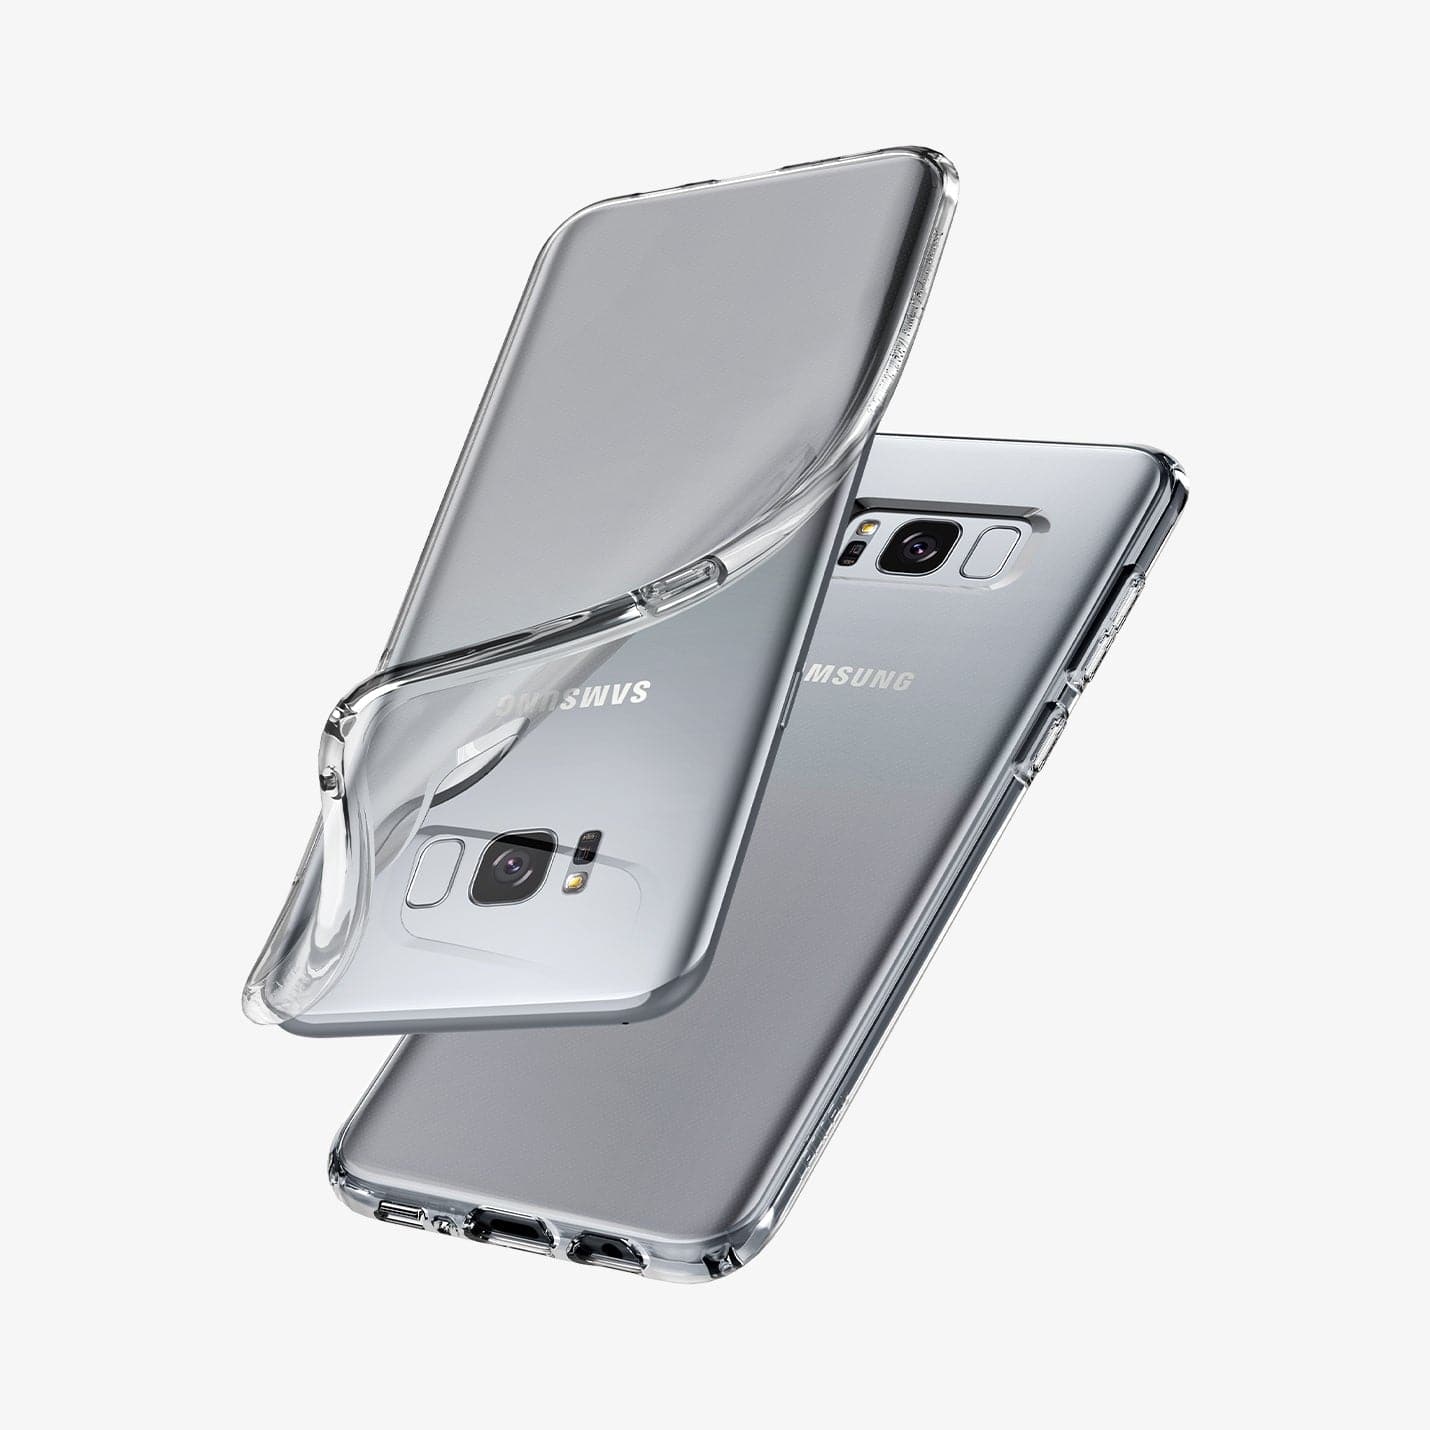 565CS21612 - Galaxy S8 Series Liquid Crystal Case in crystal clear showing the back with case slightly bending away from the device